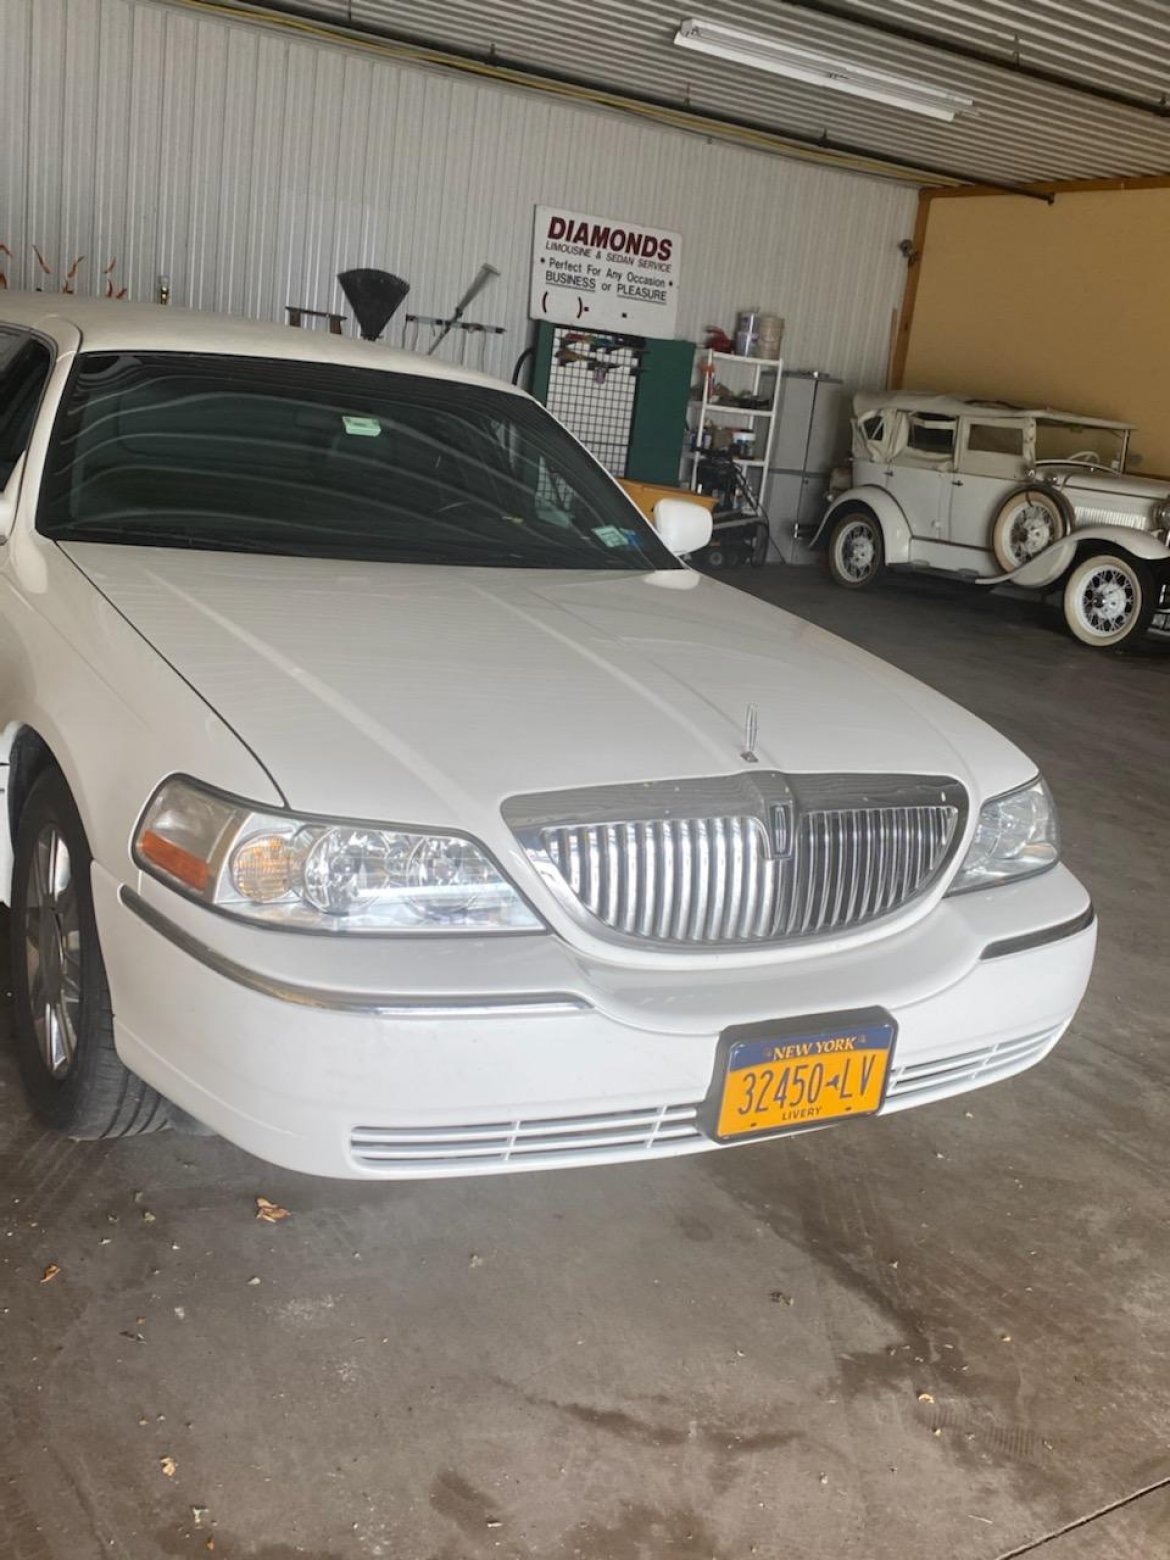 Limousine for sale: 2008 Lincoln Town Car 120&quot; by Krystal